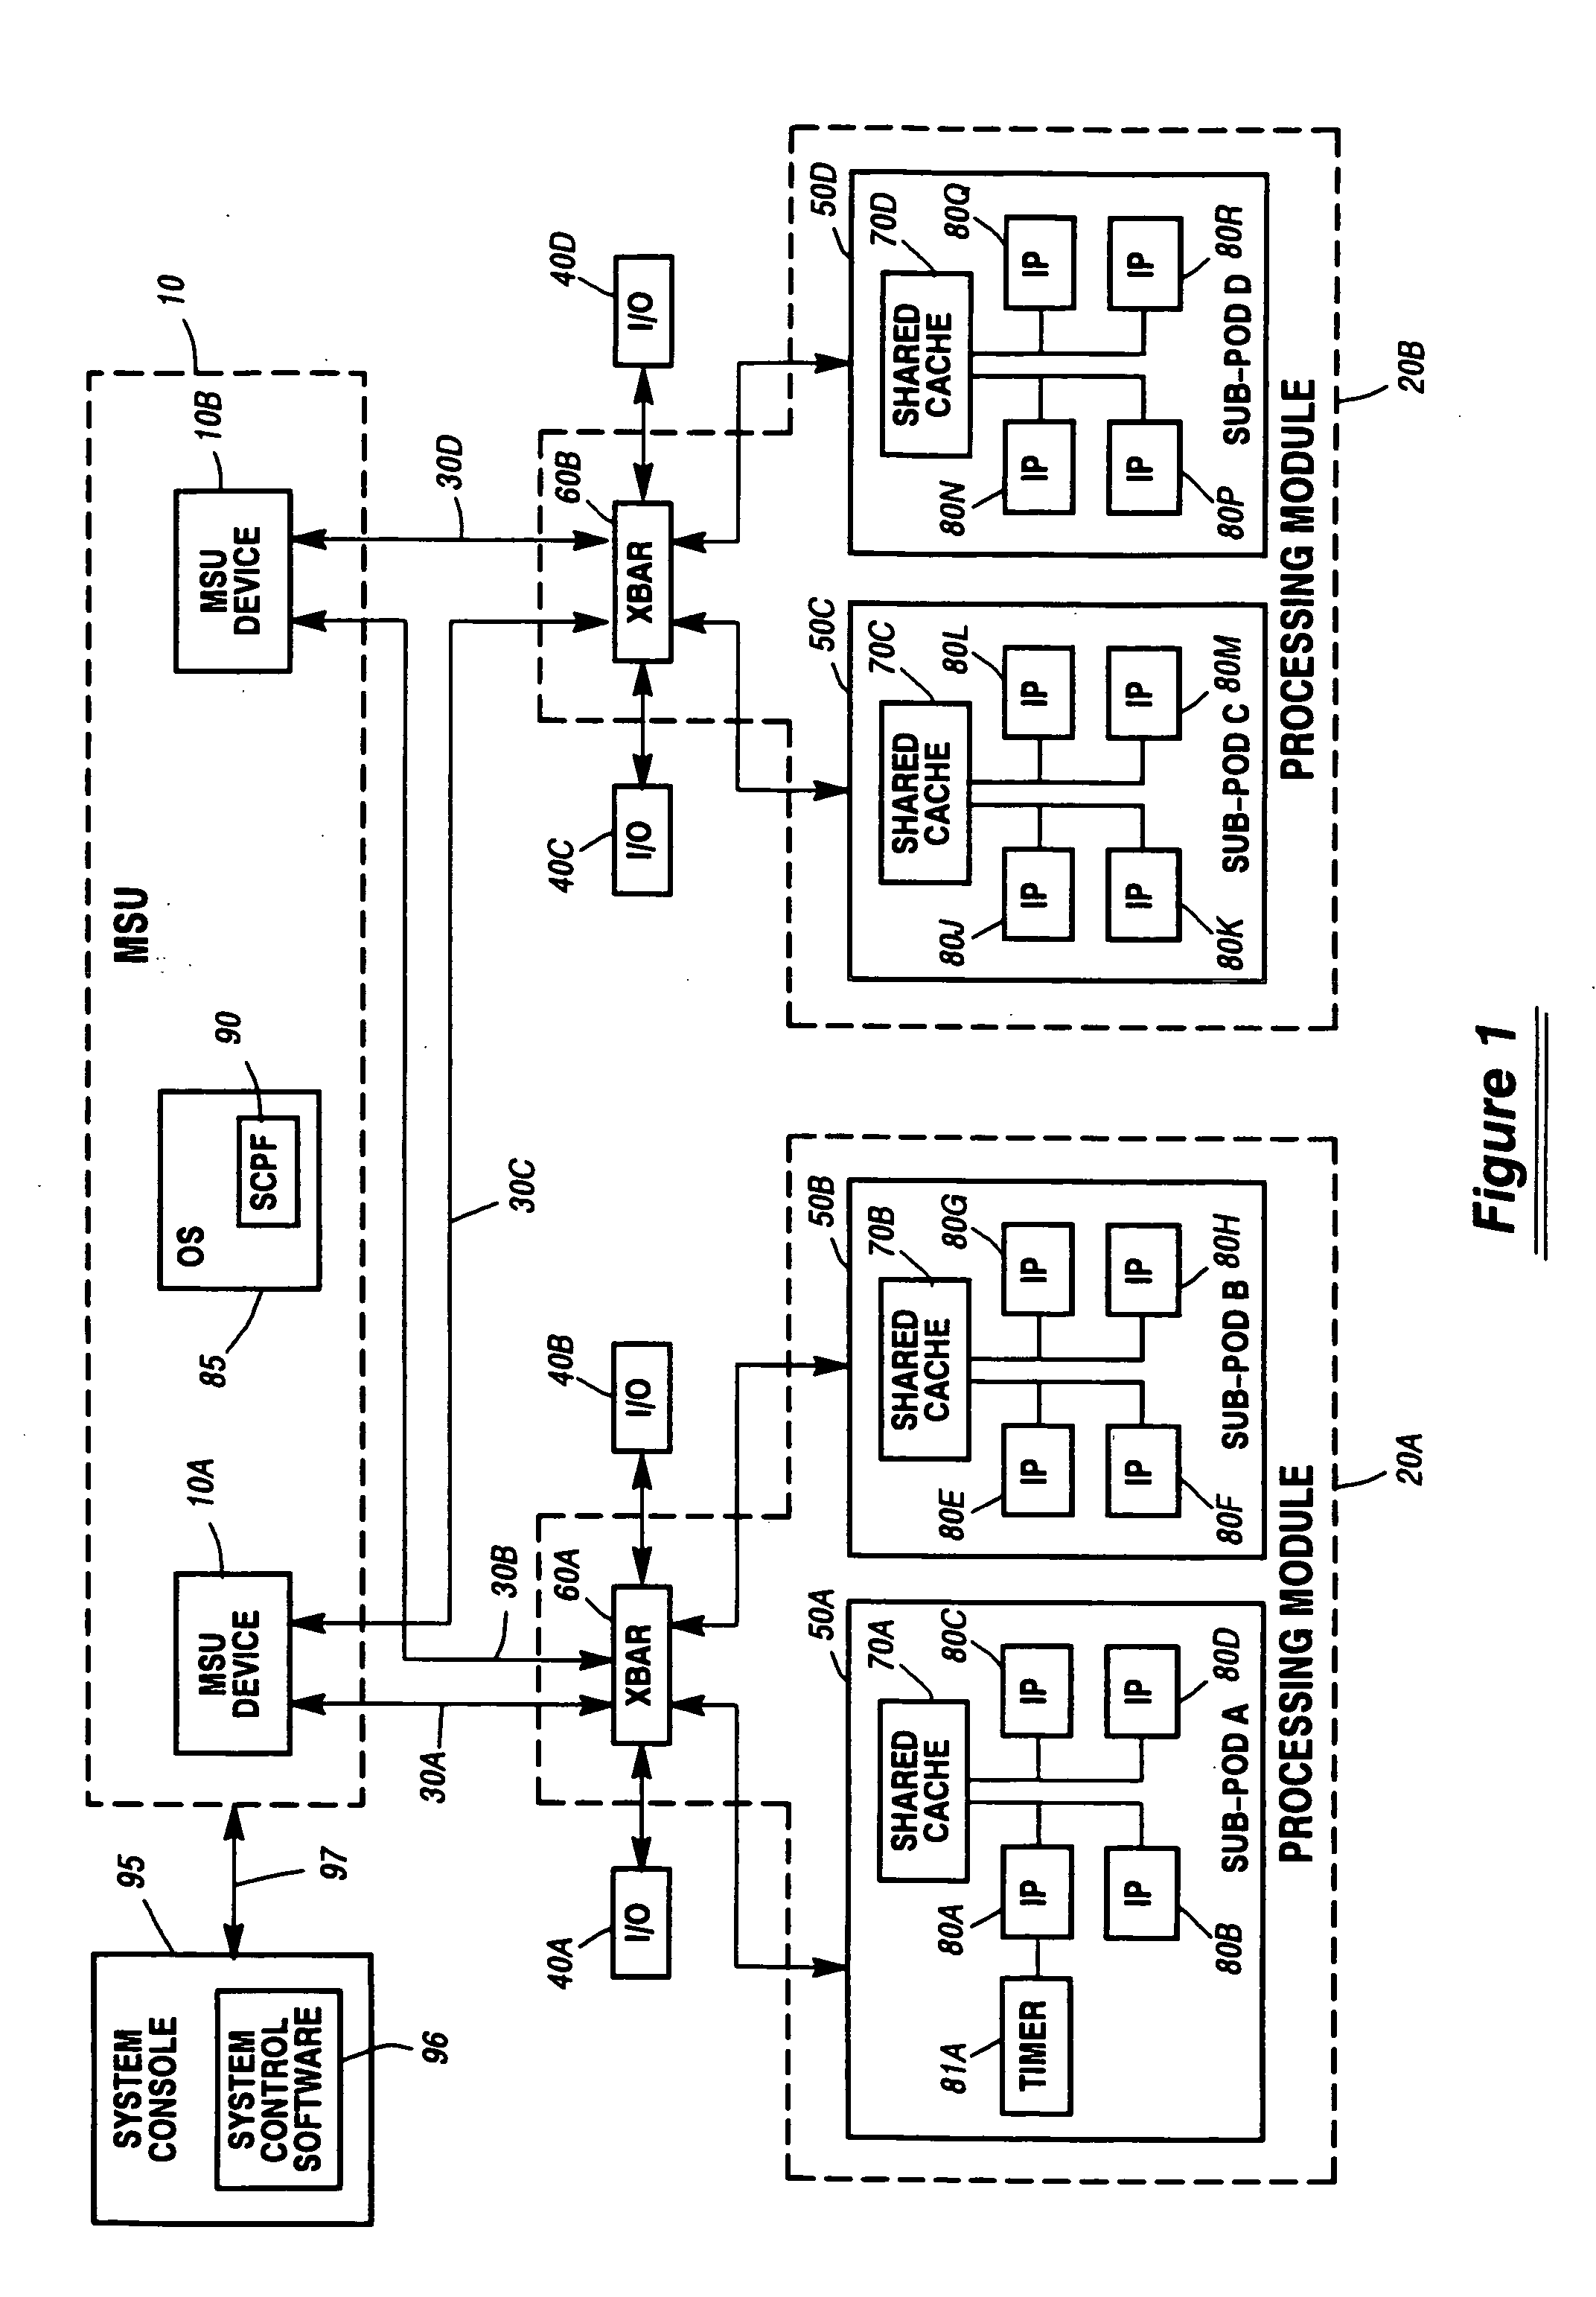 System and method for metering the performance of a data processing system